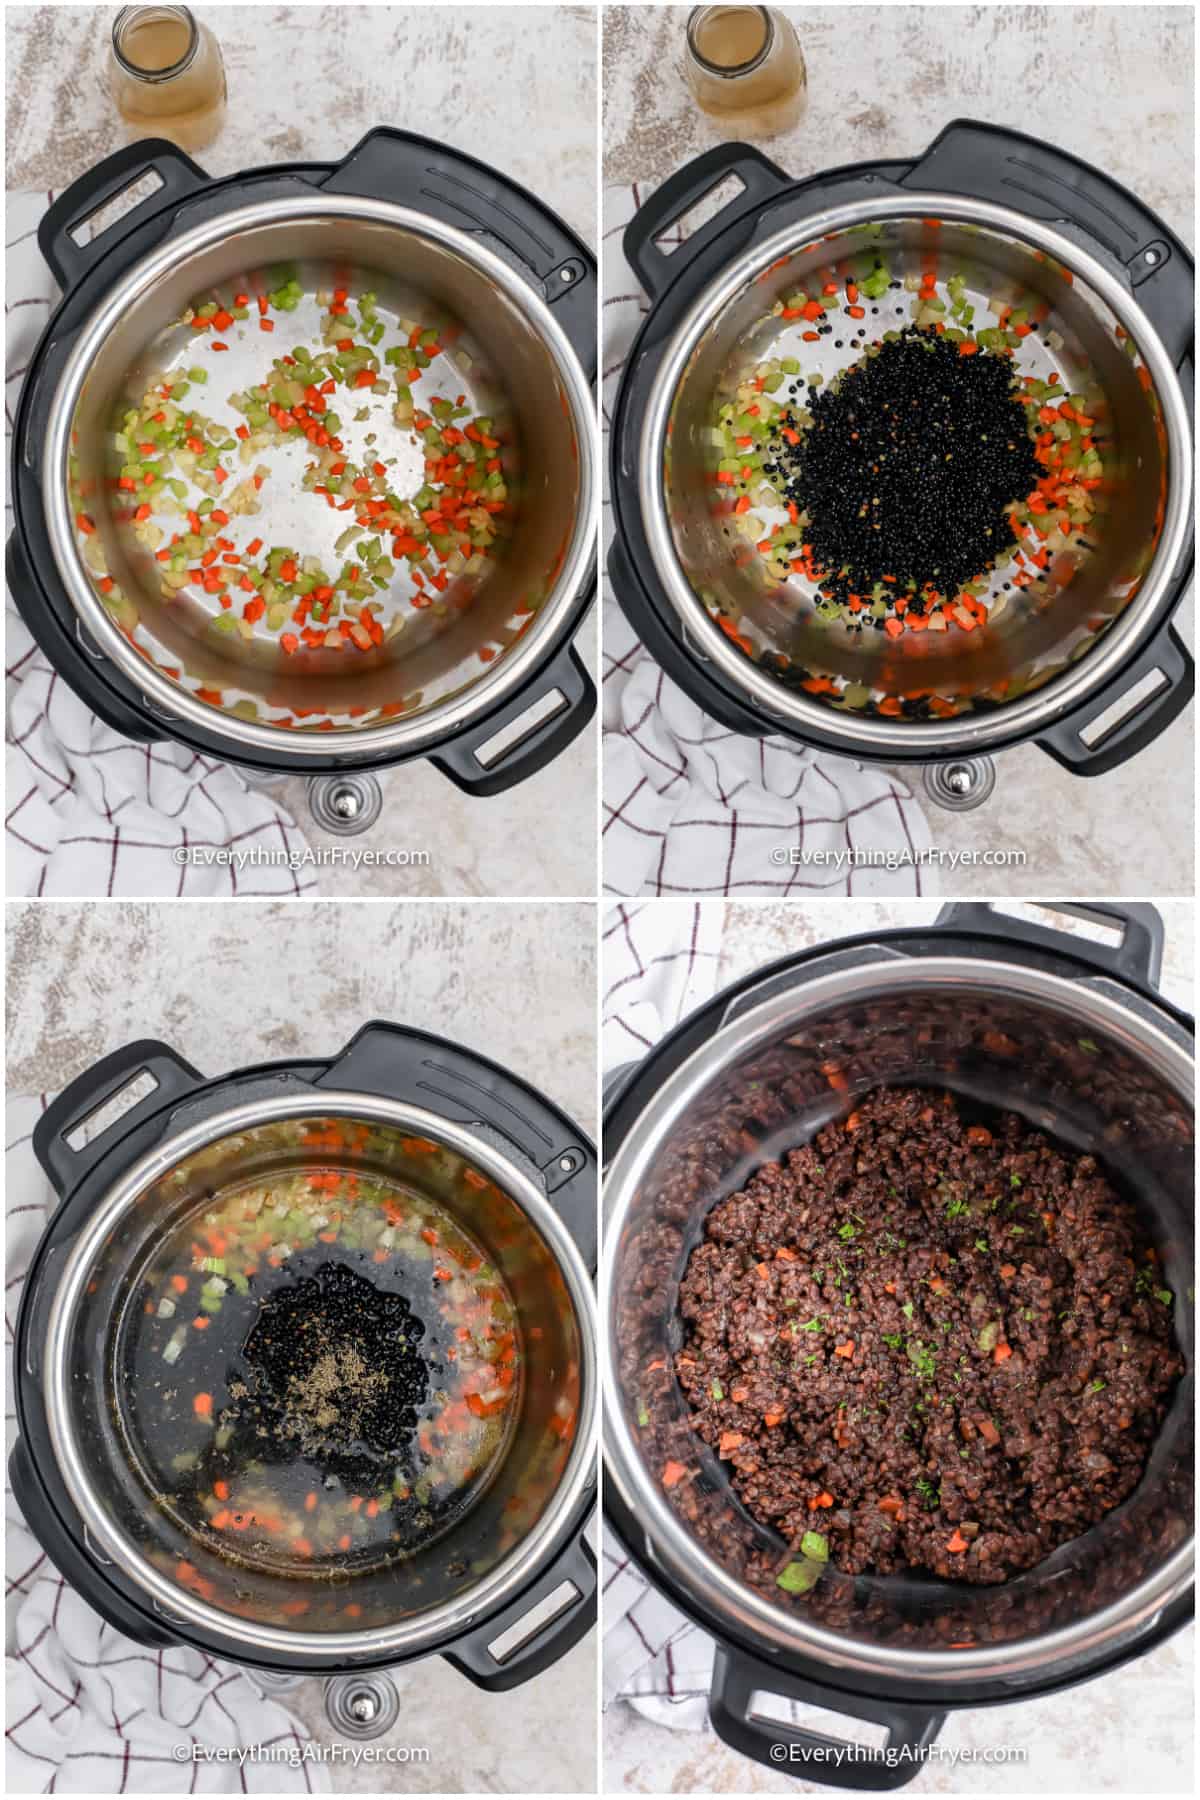 process of cooking lentils in an instant pot